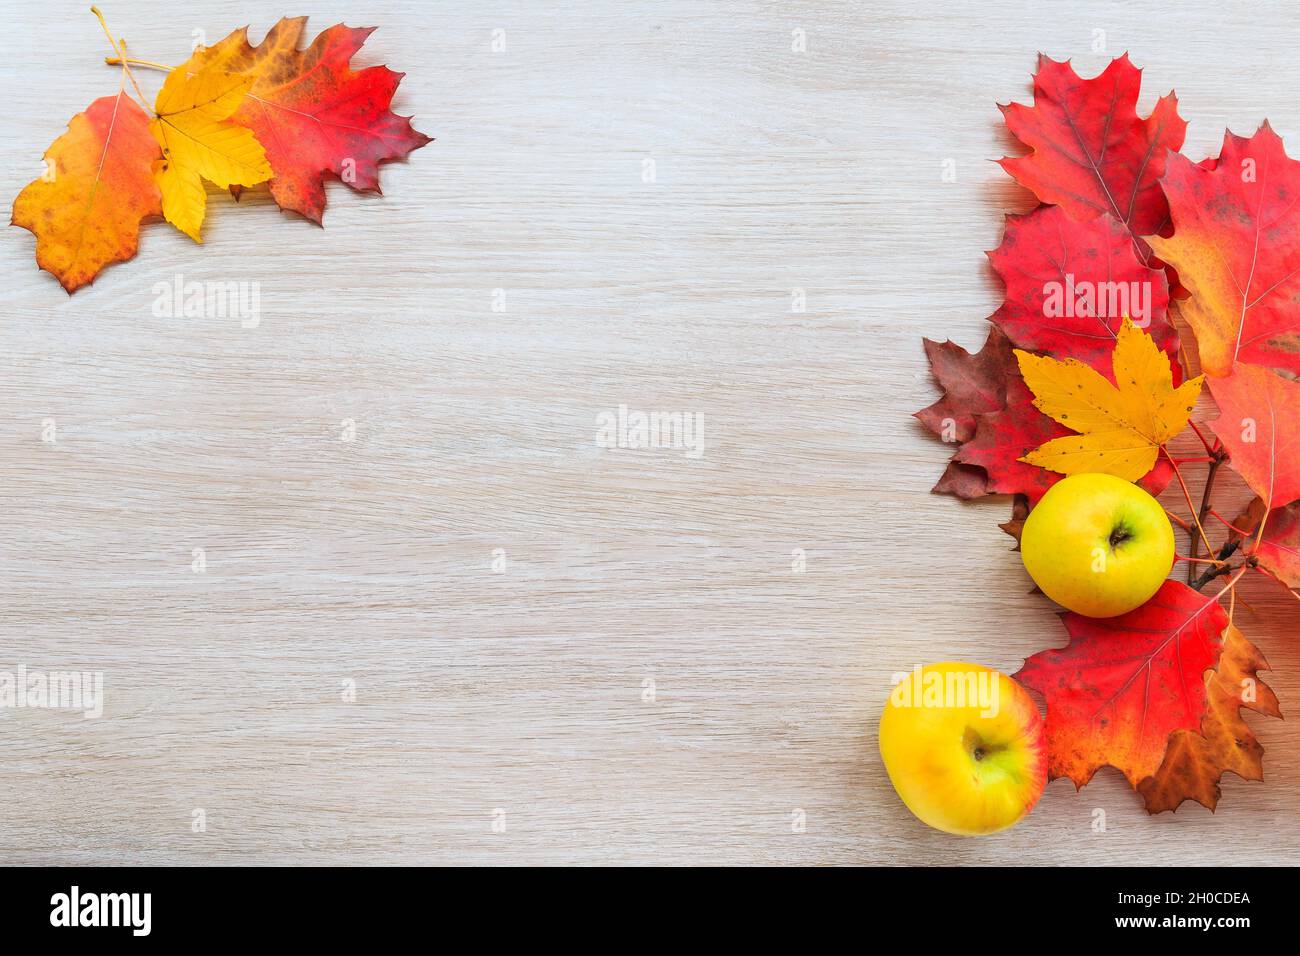 Autumn decor from leaves and yellow apple on a wooden background. Flat lay autumn composition with copy space. Stock Photo